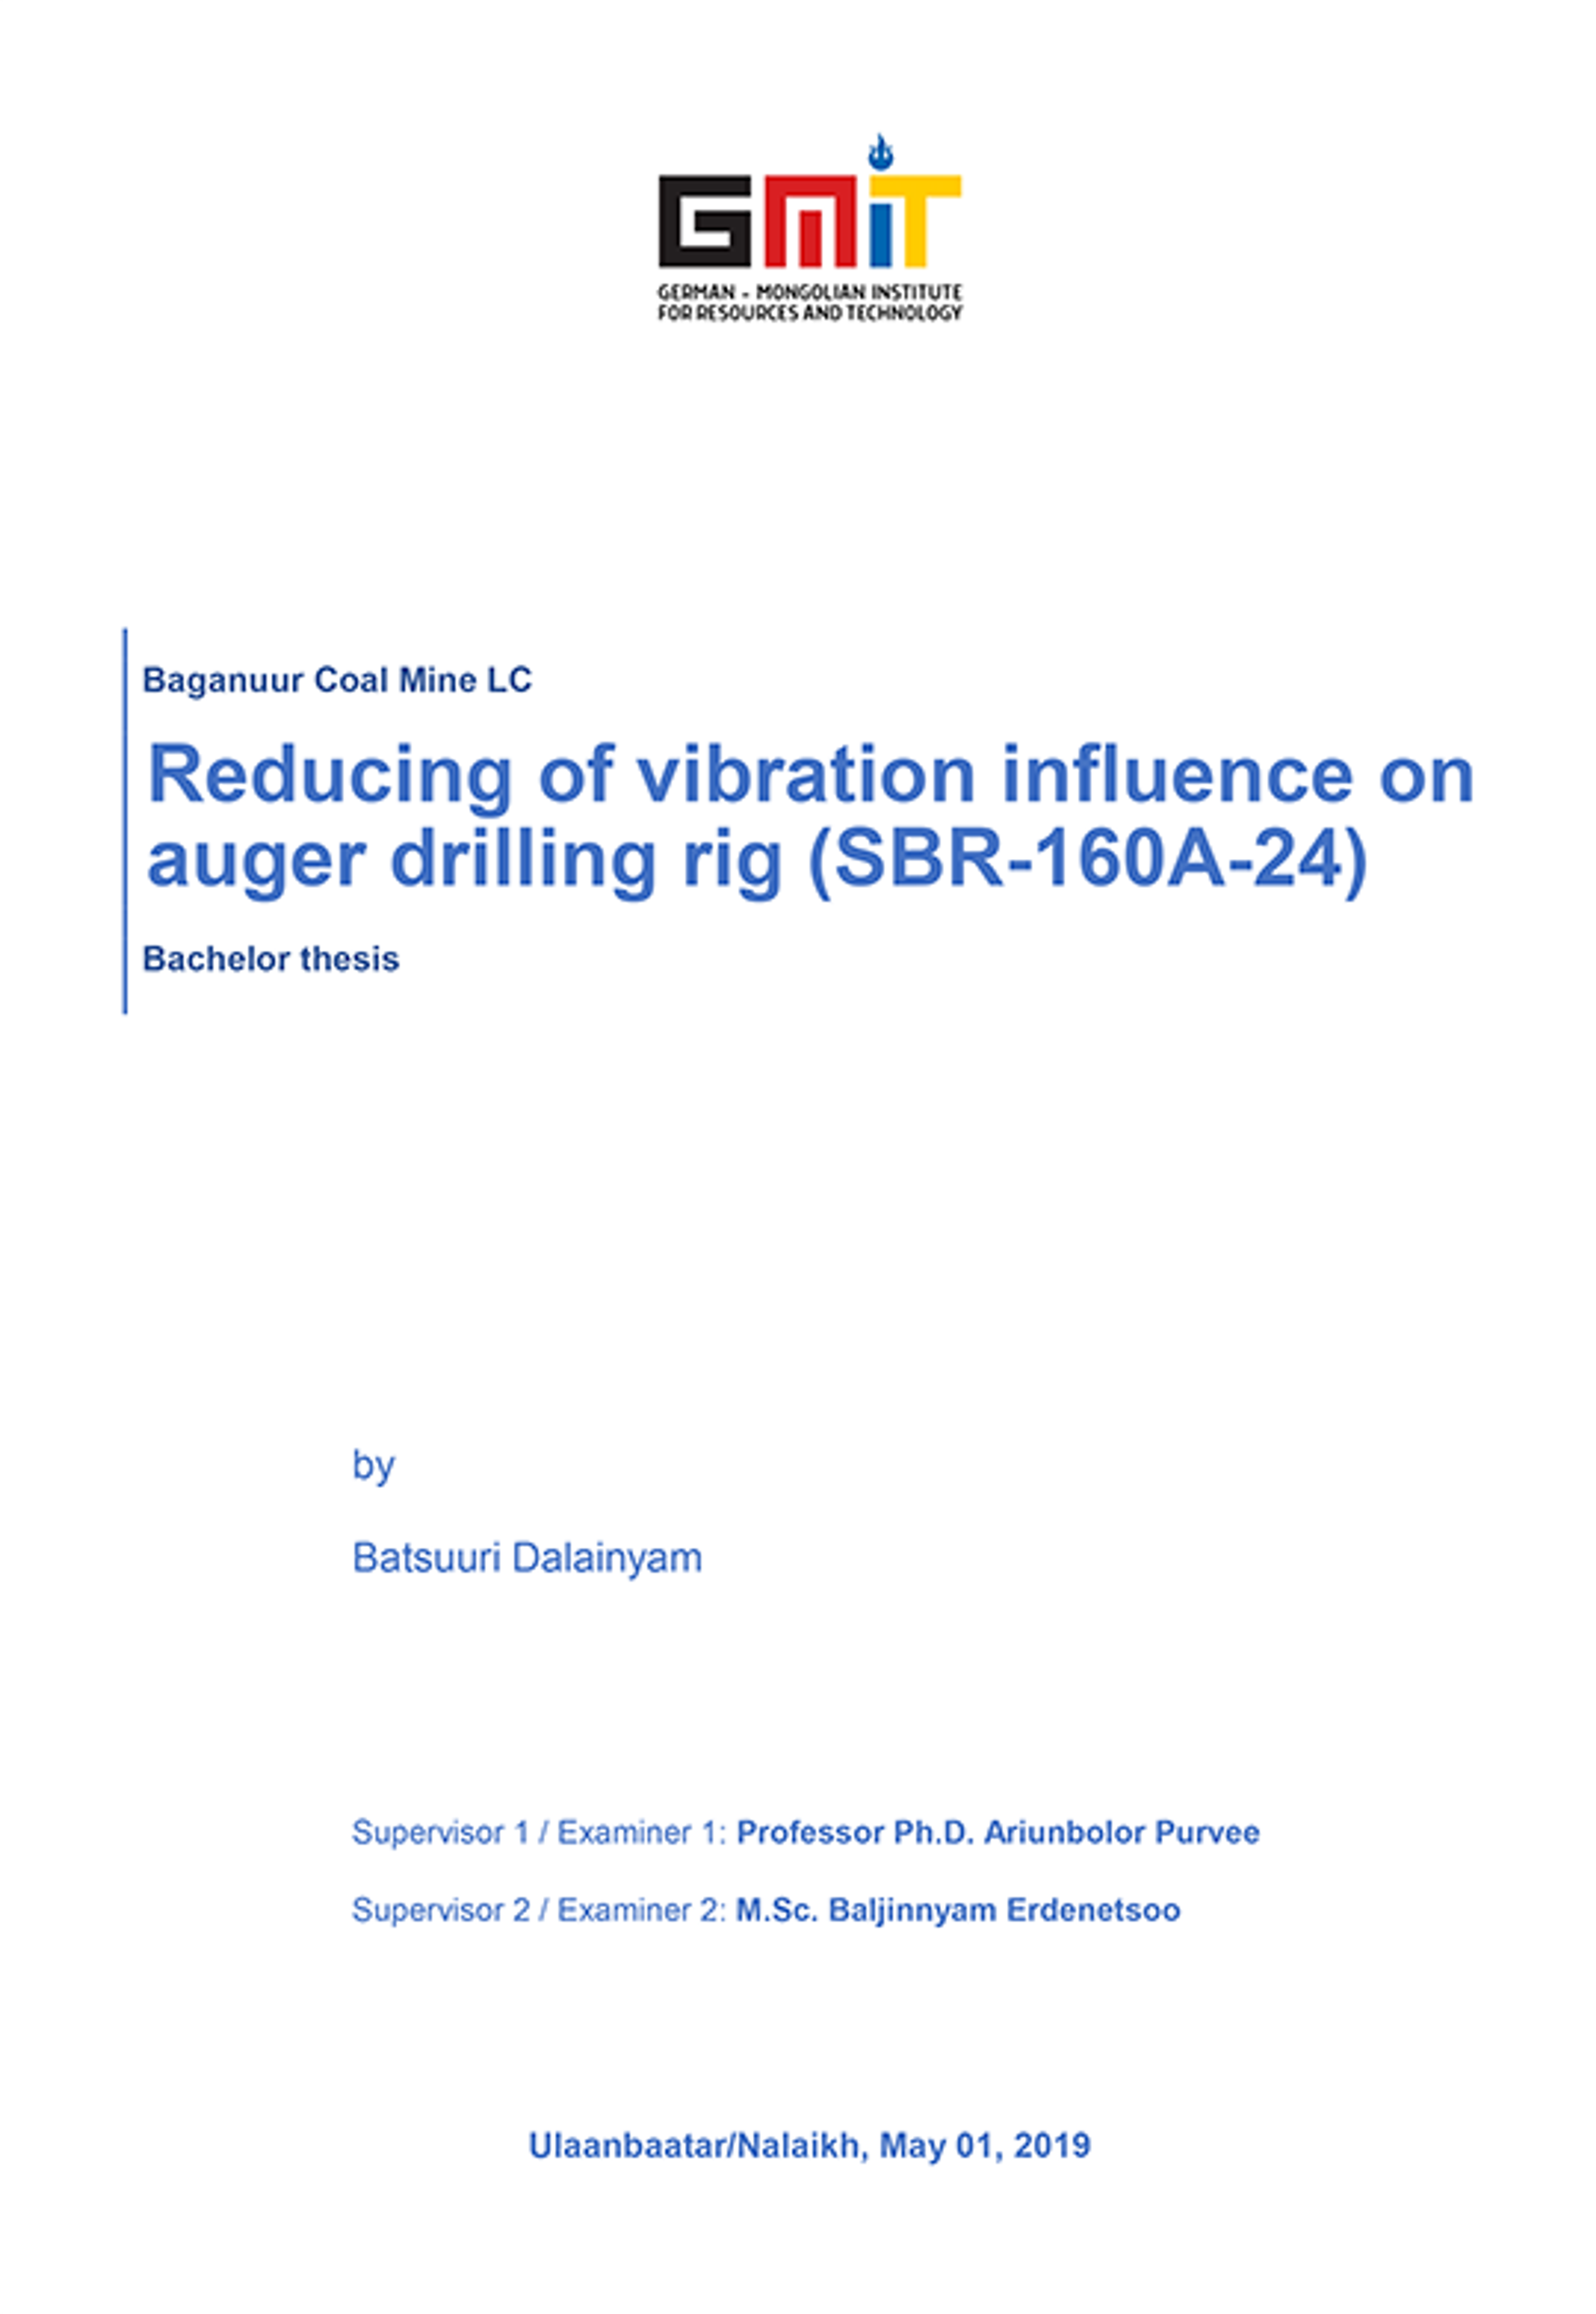 Reducing of vibration influence on auger drilling rig (SBR-160A-24)